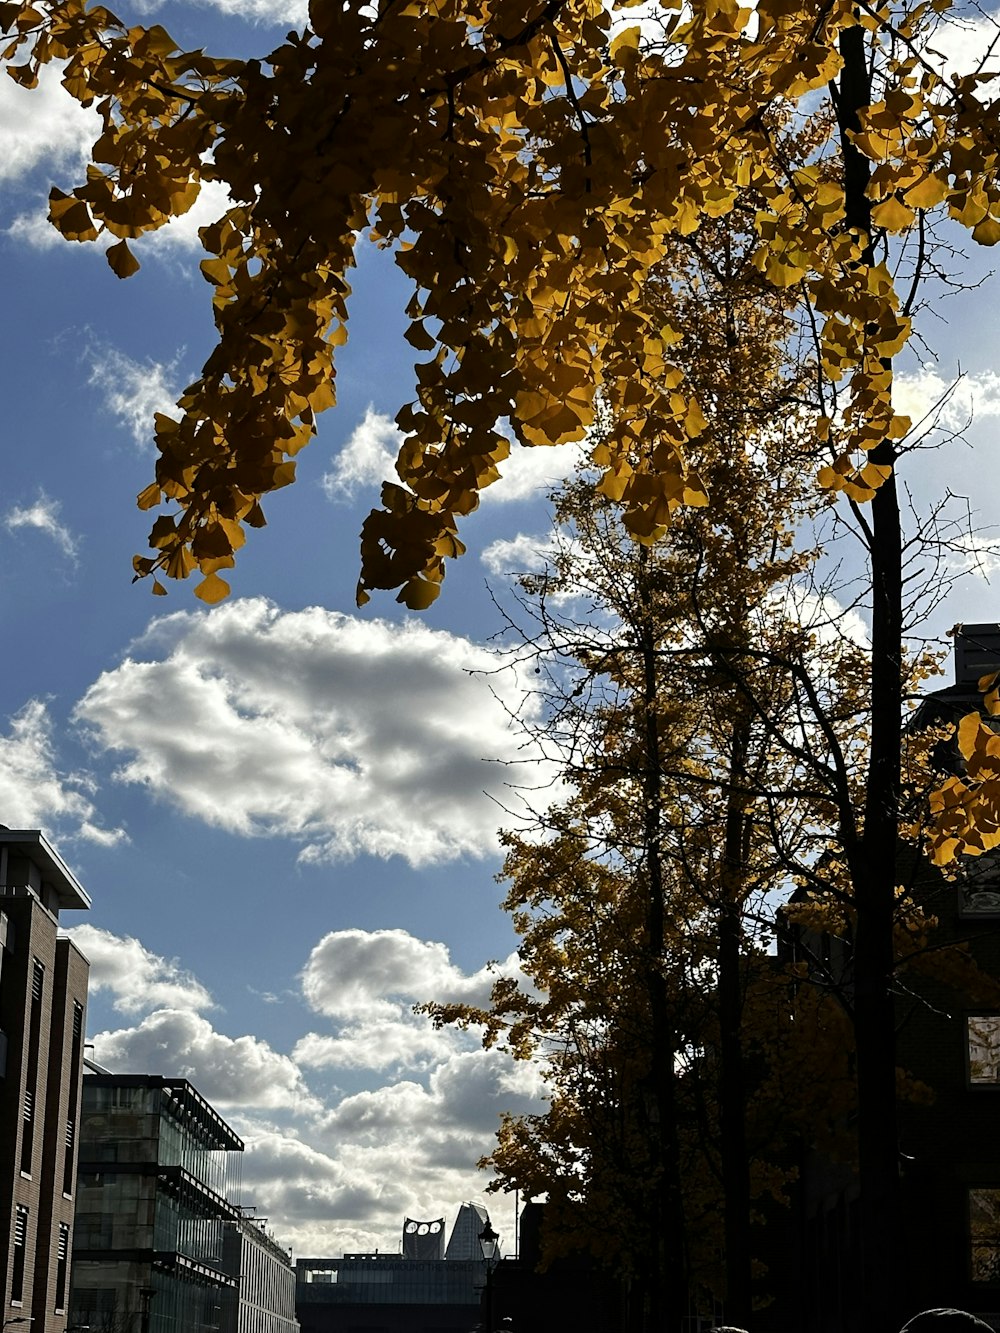 a tree with yellow leaves and a building in the background